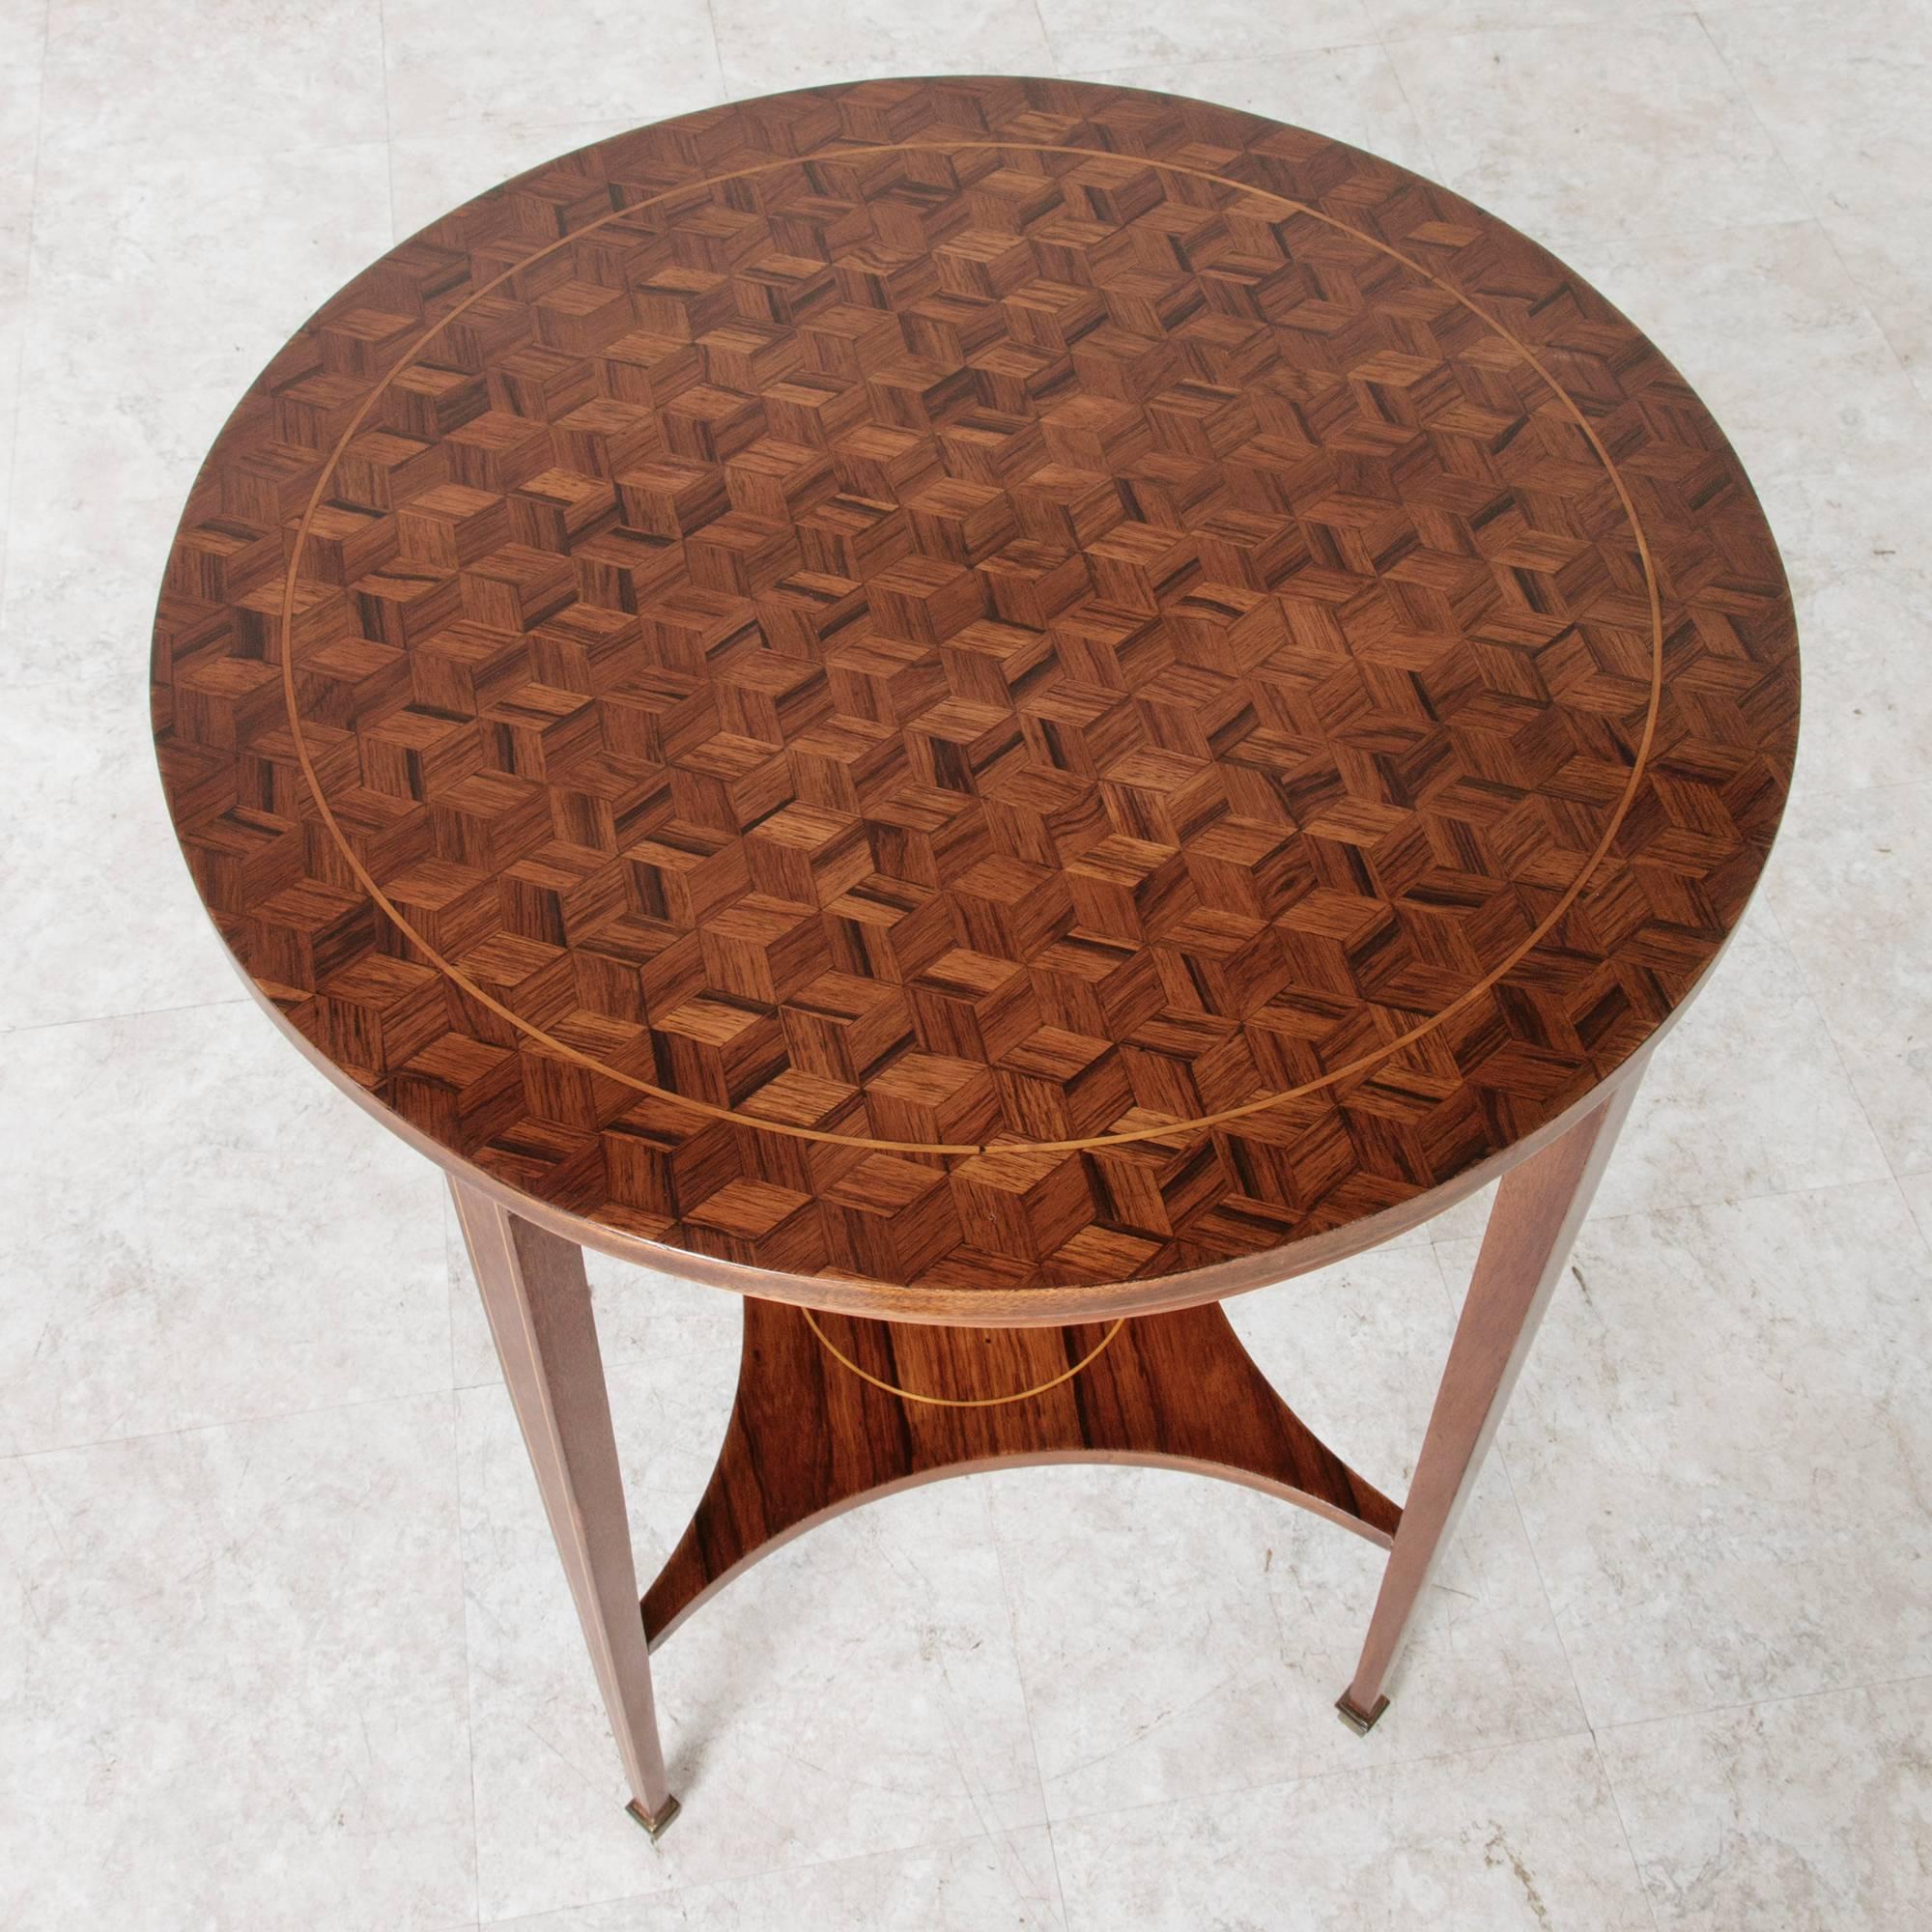 This French Art Deco period round side table features a parquetry top of intricate geometric inlay of rosewood accented with a pin line of inlaid lemonwood.  The delicate lemonwood pin line is repeated on its lower shelf and along its tapered legs